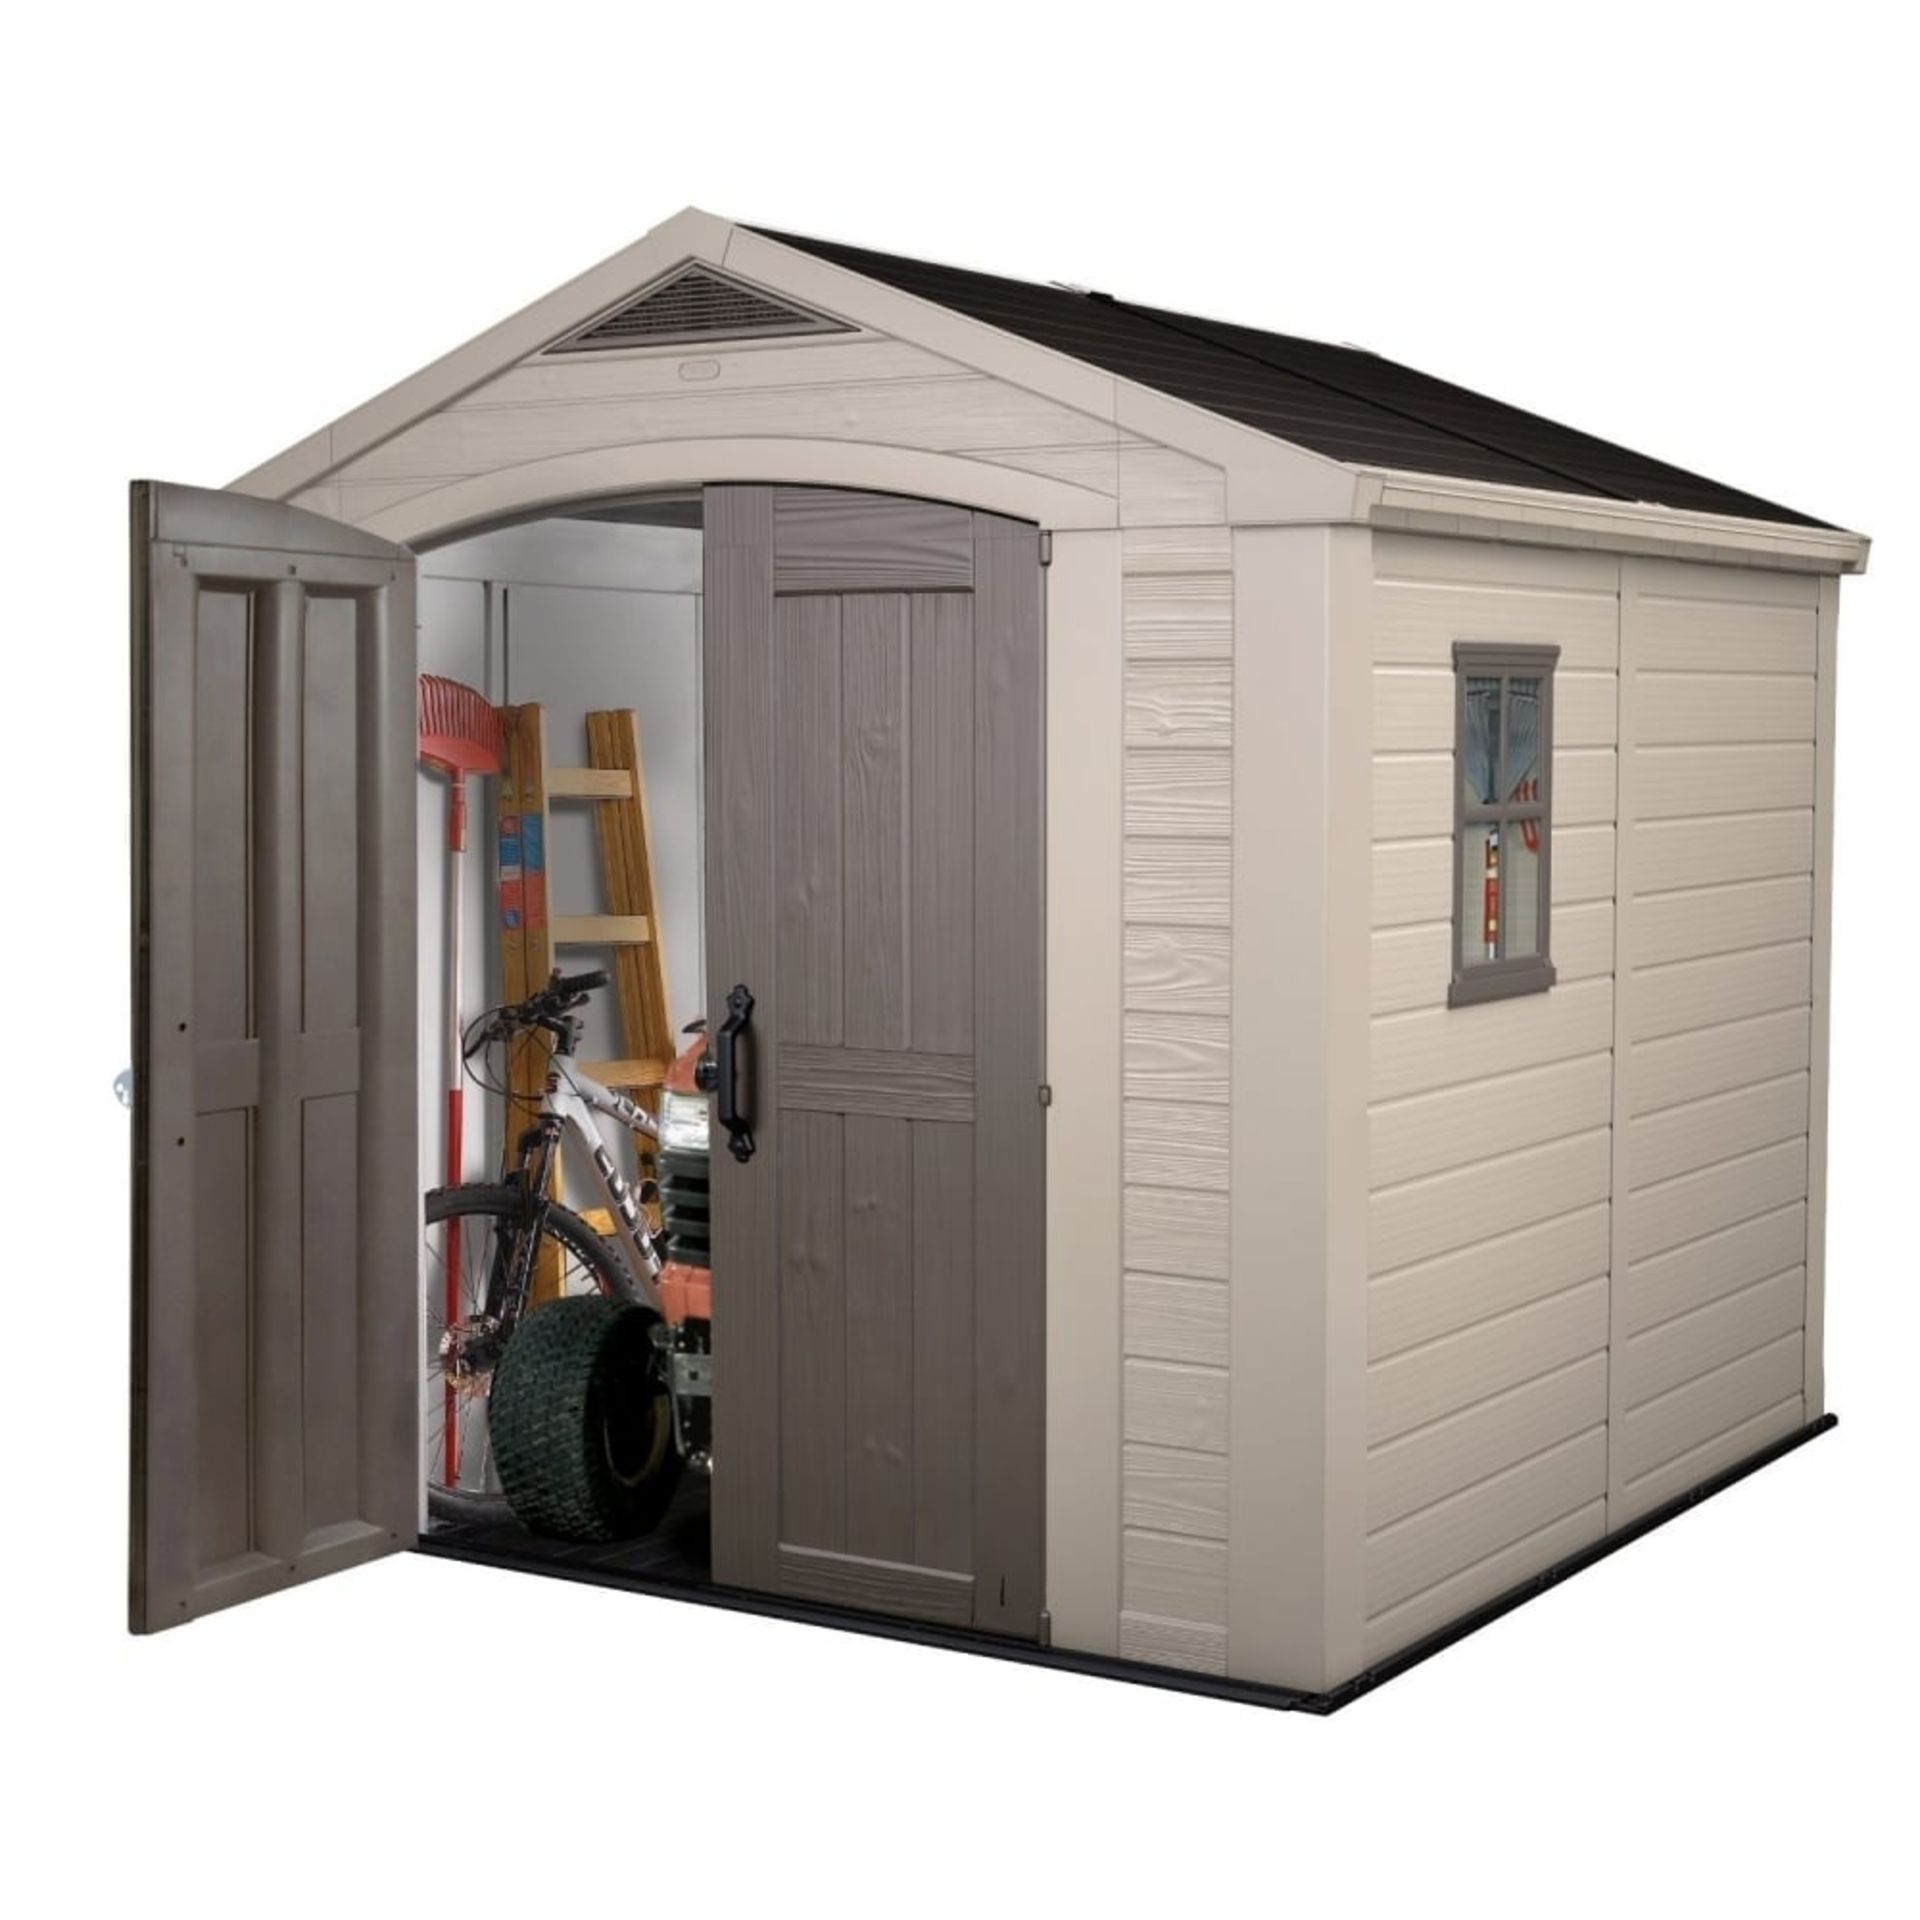 Brand new and boxed Keter Factor 8x8 shed - RRP £750